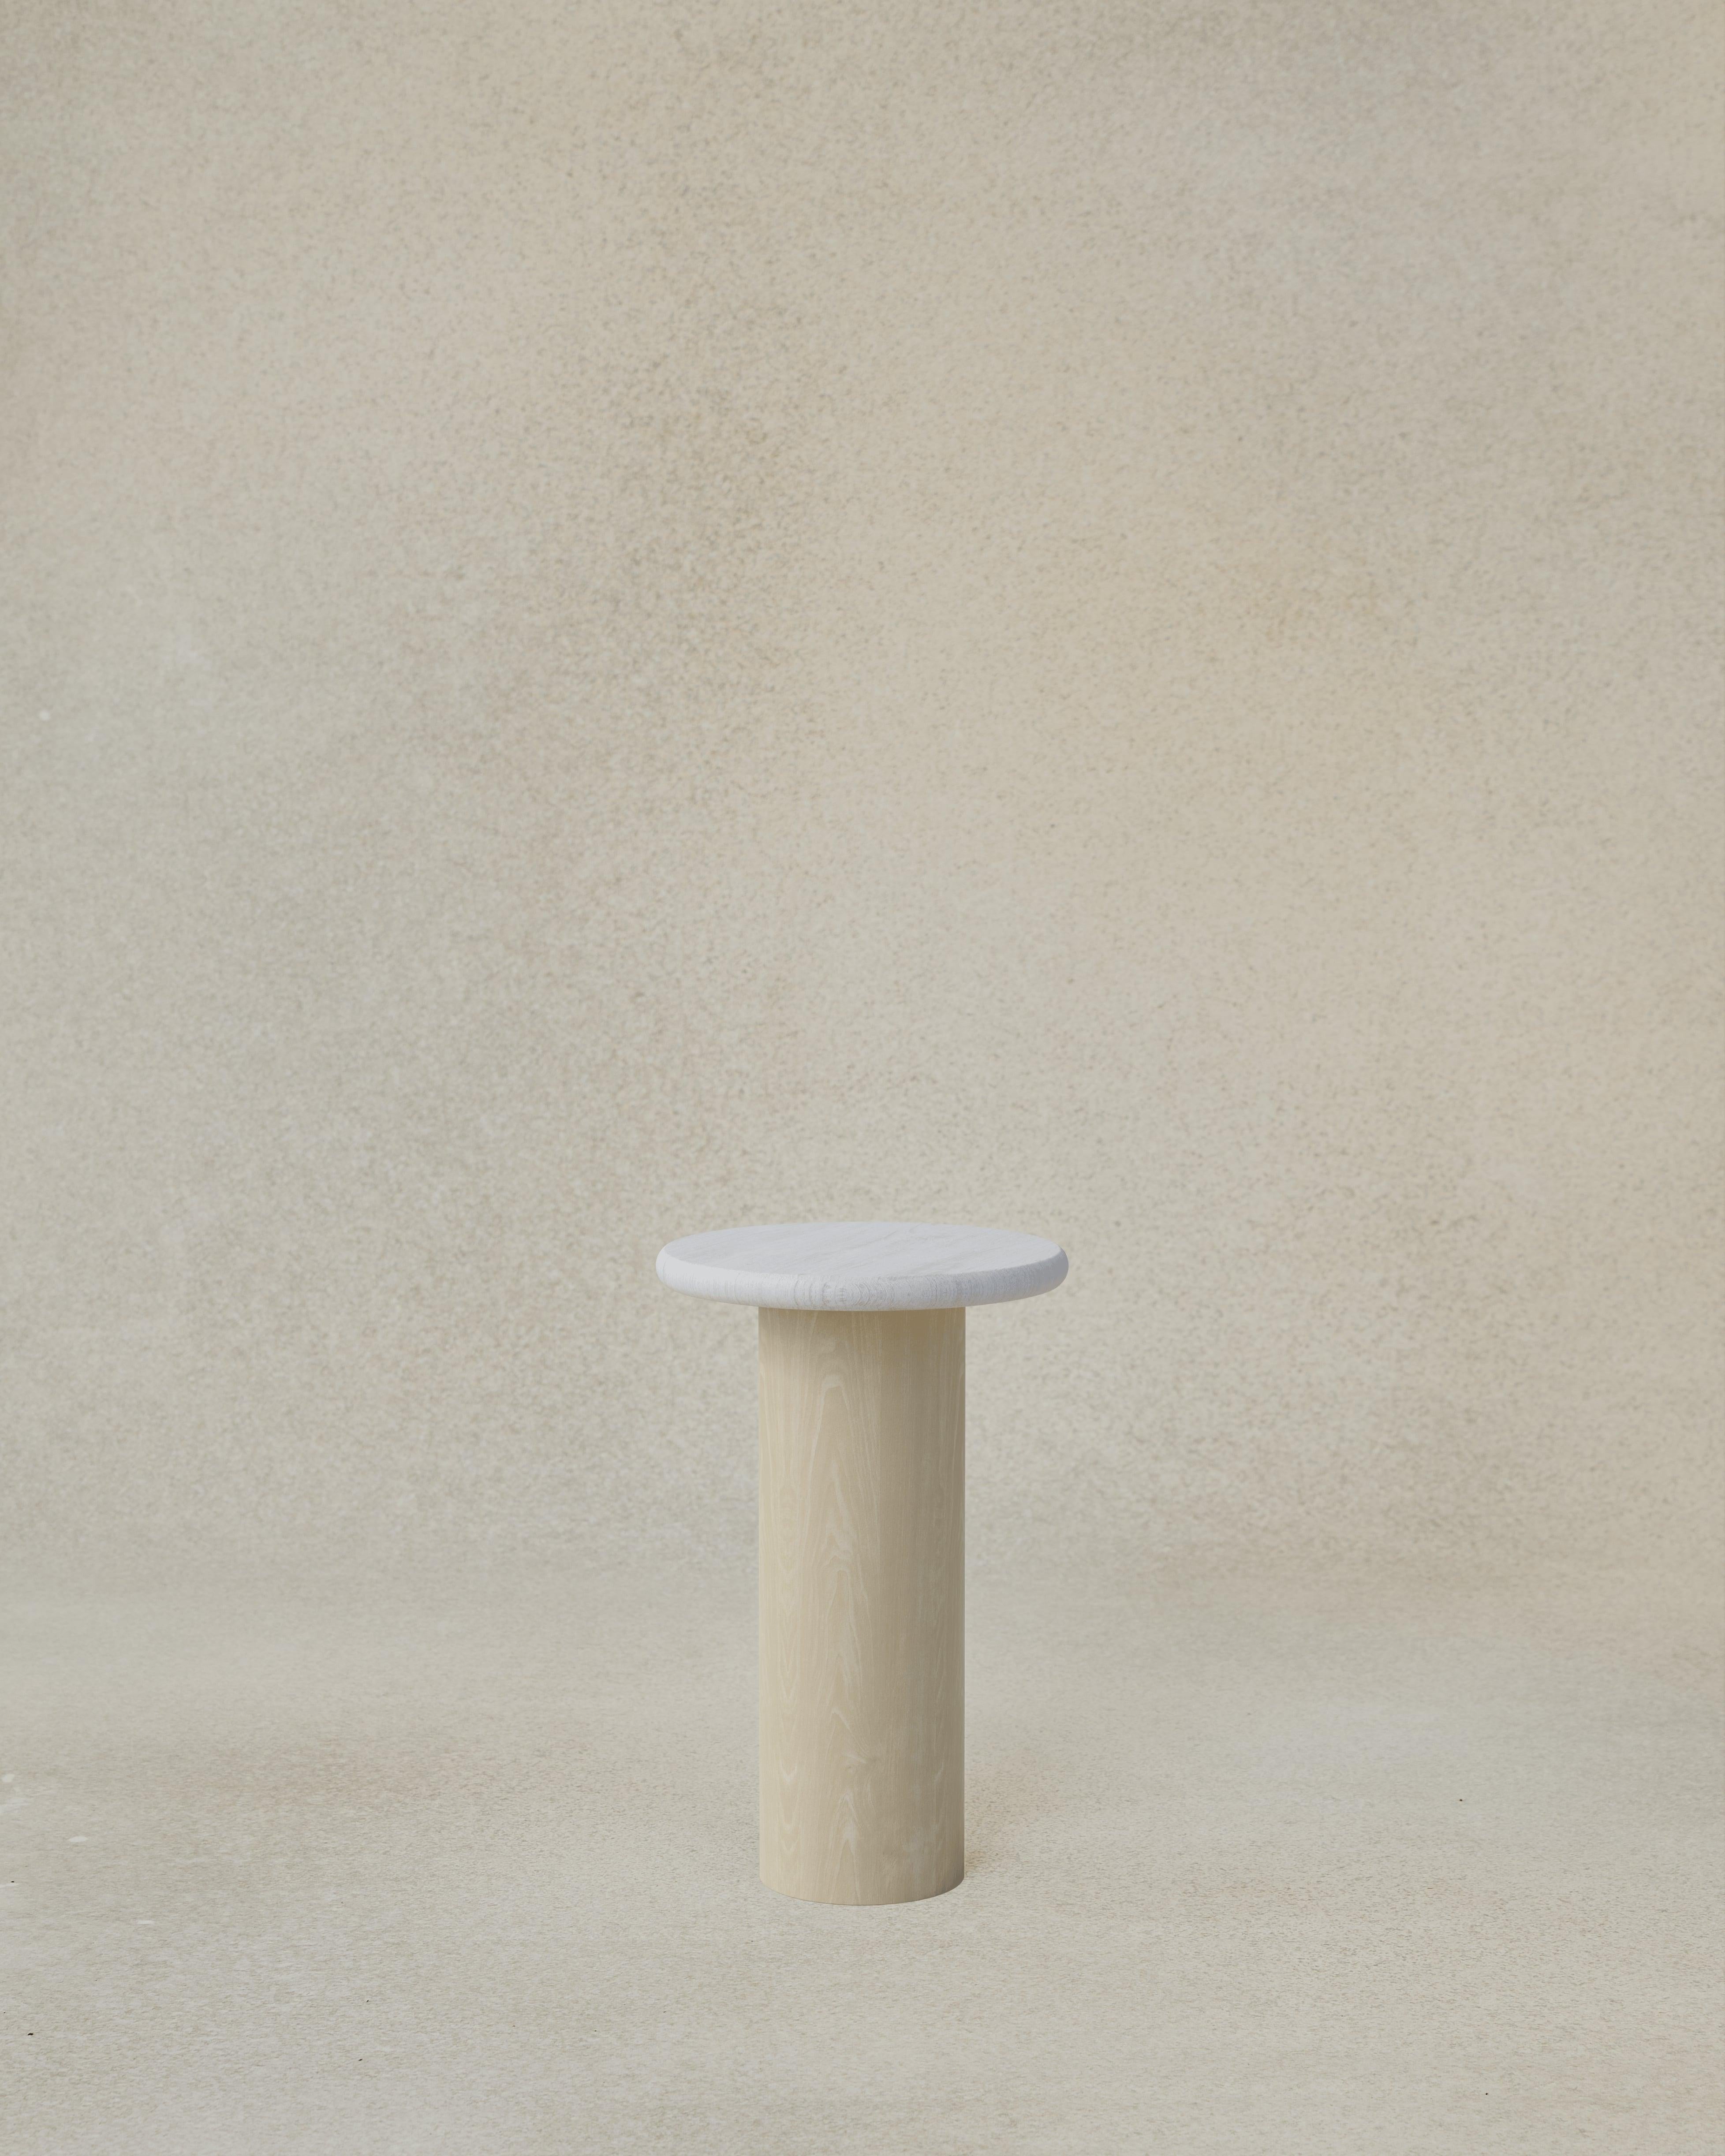 The raindrop 300 is the smallest and tallest Raindrop we offer in the series, designed to be a side table or bedside table for your home and now available in a range of finishes to suit any interior or style. The raindrops nestle together to form a